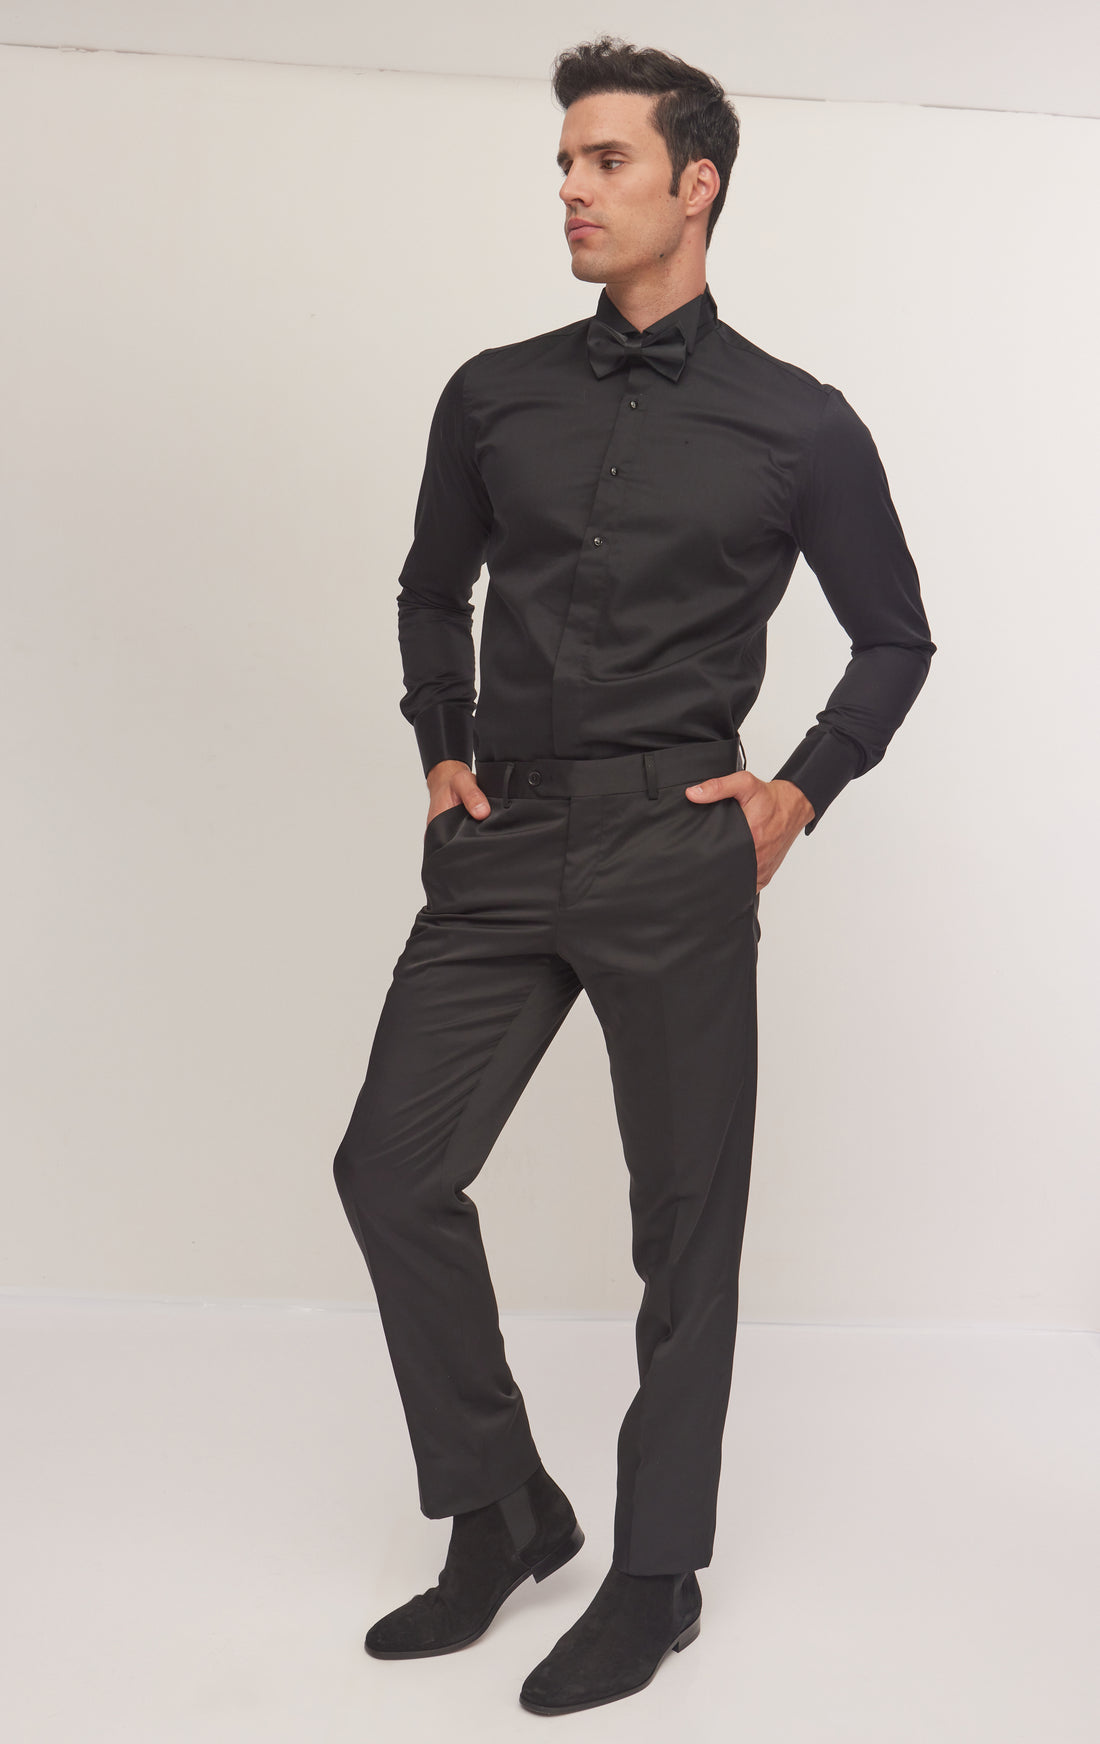 N° 4715 WING CLASSICAL TOP 3 FRONT STUD TUXEDO SHIRT - BLACK